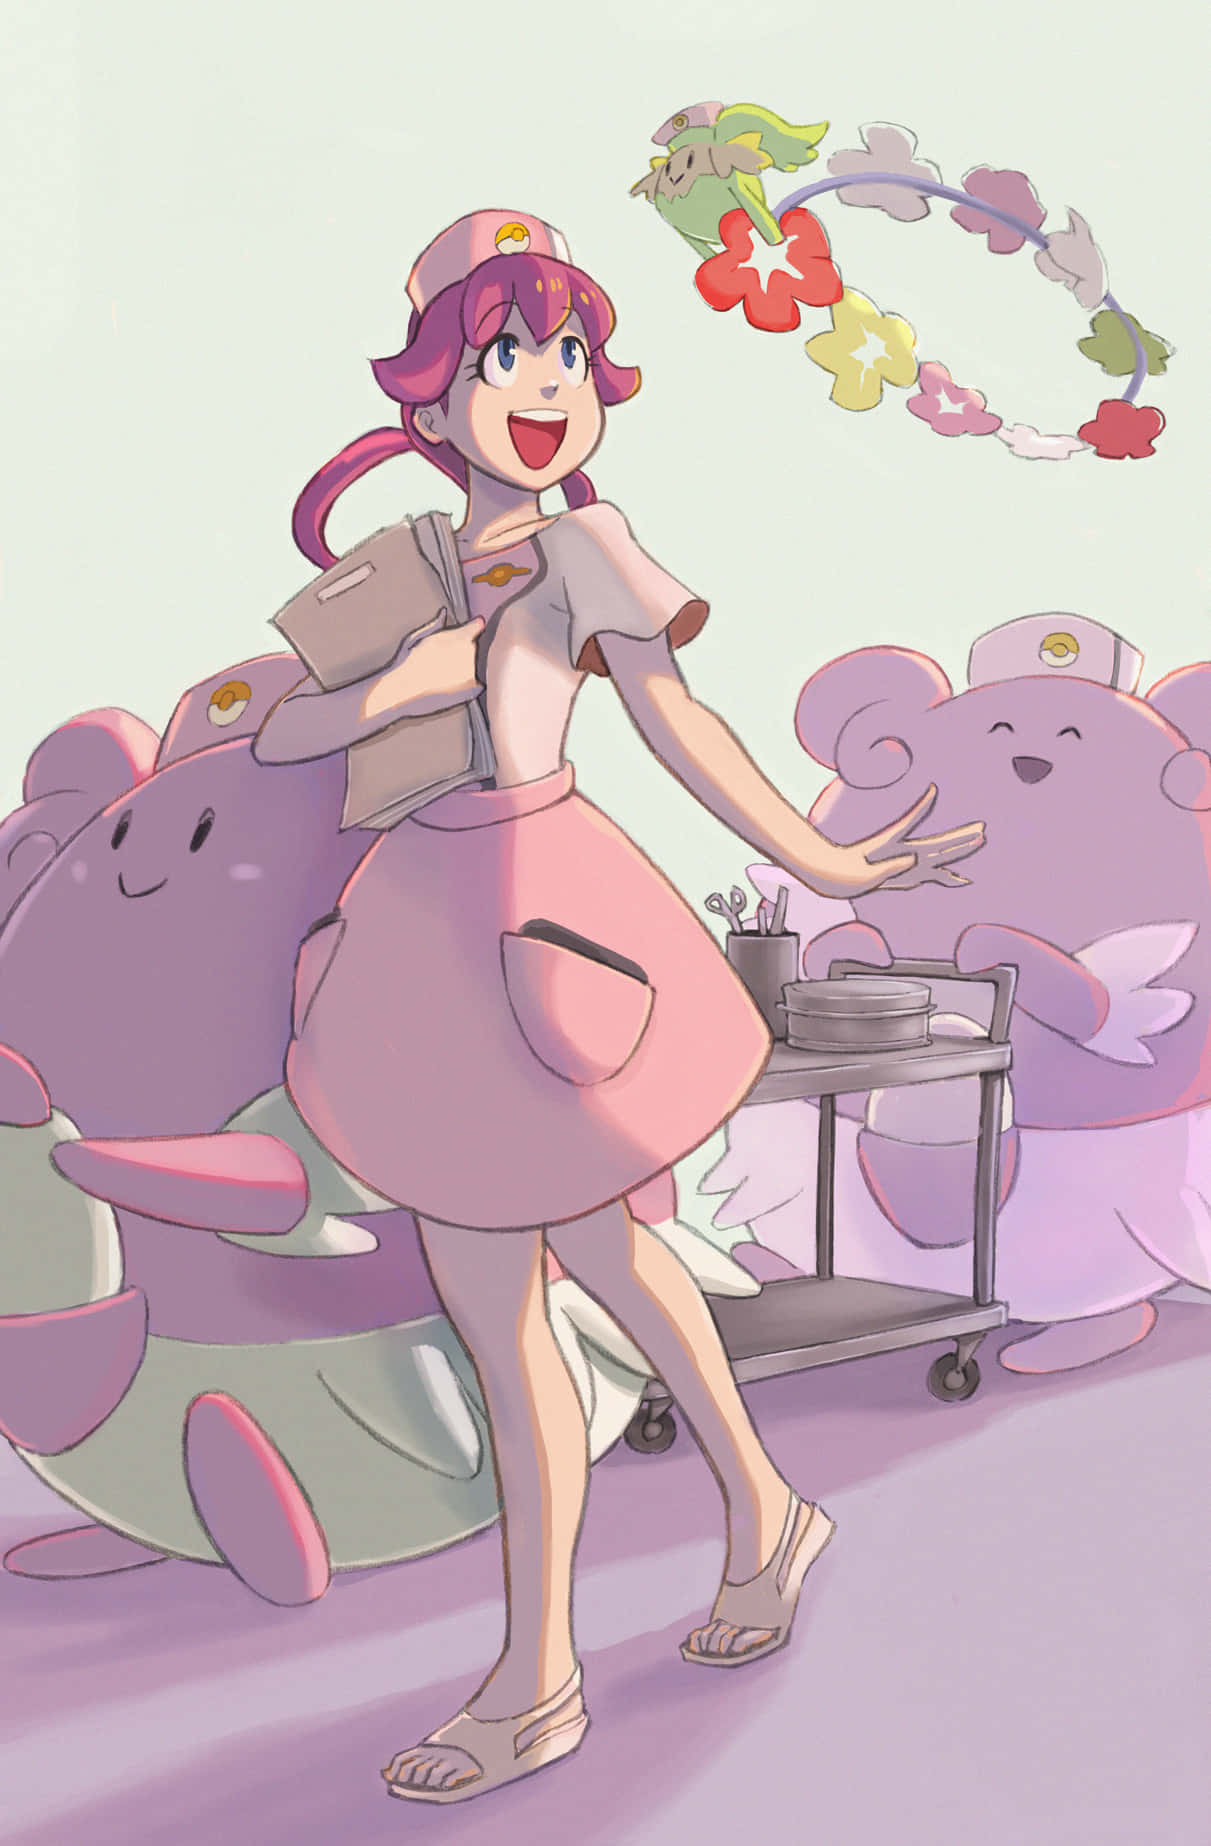 Caption: A friendly encounter with Nurse Joy and her trusty Pokemon, Blissey Wallpaper